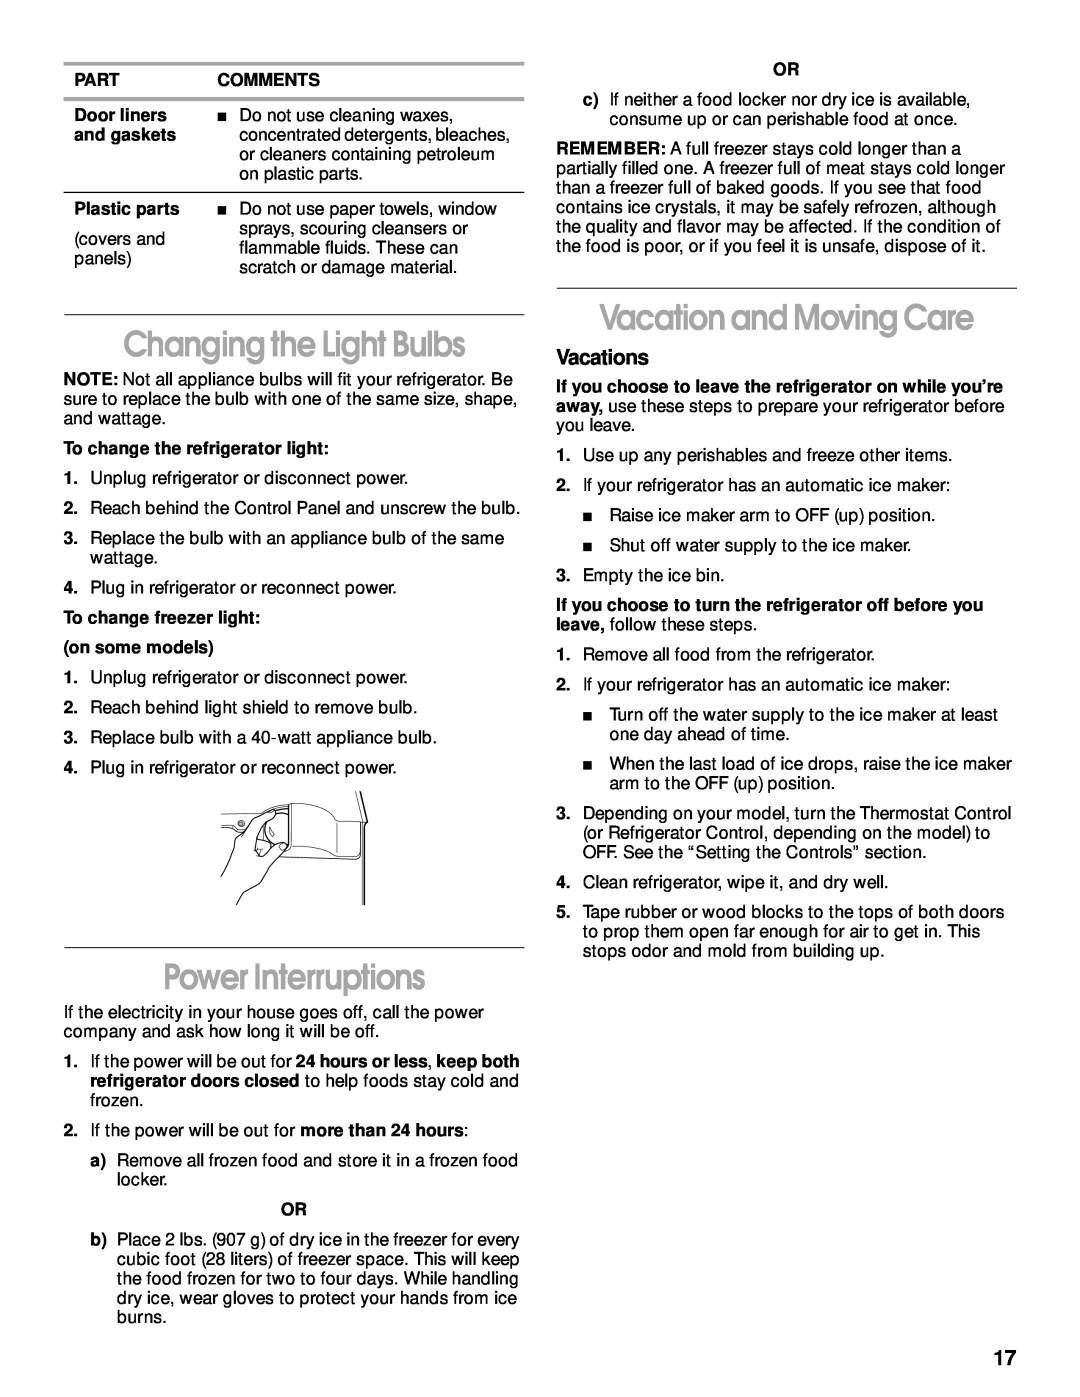 Whirlpool 2199011 manual Changing the Light Bulbs, Power Interruptions, Vacation and Moving Care, Vacations 